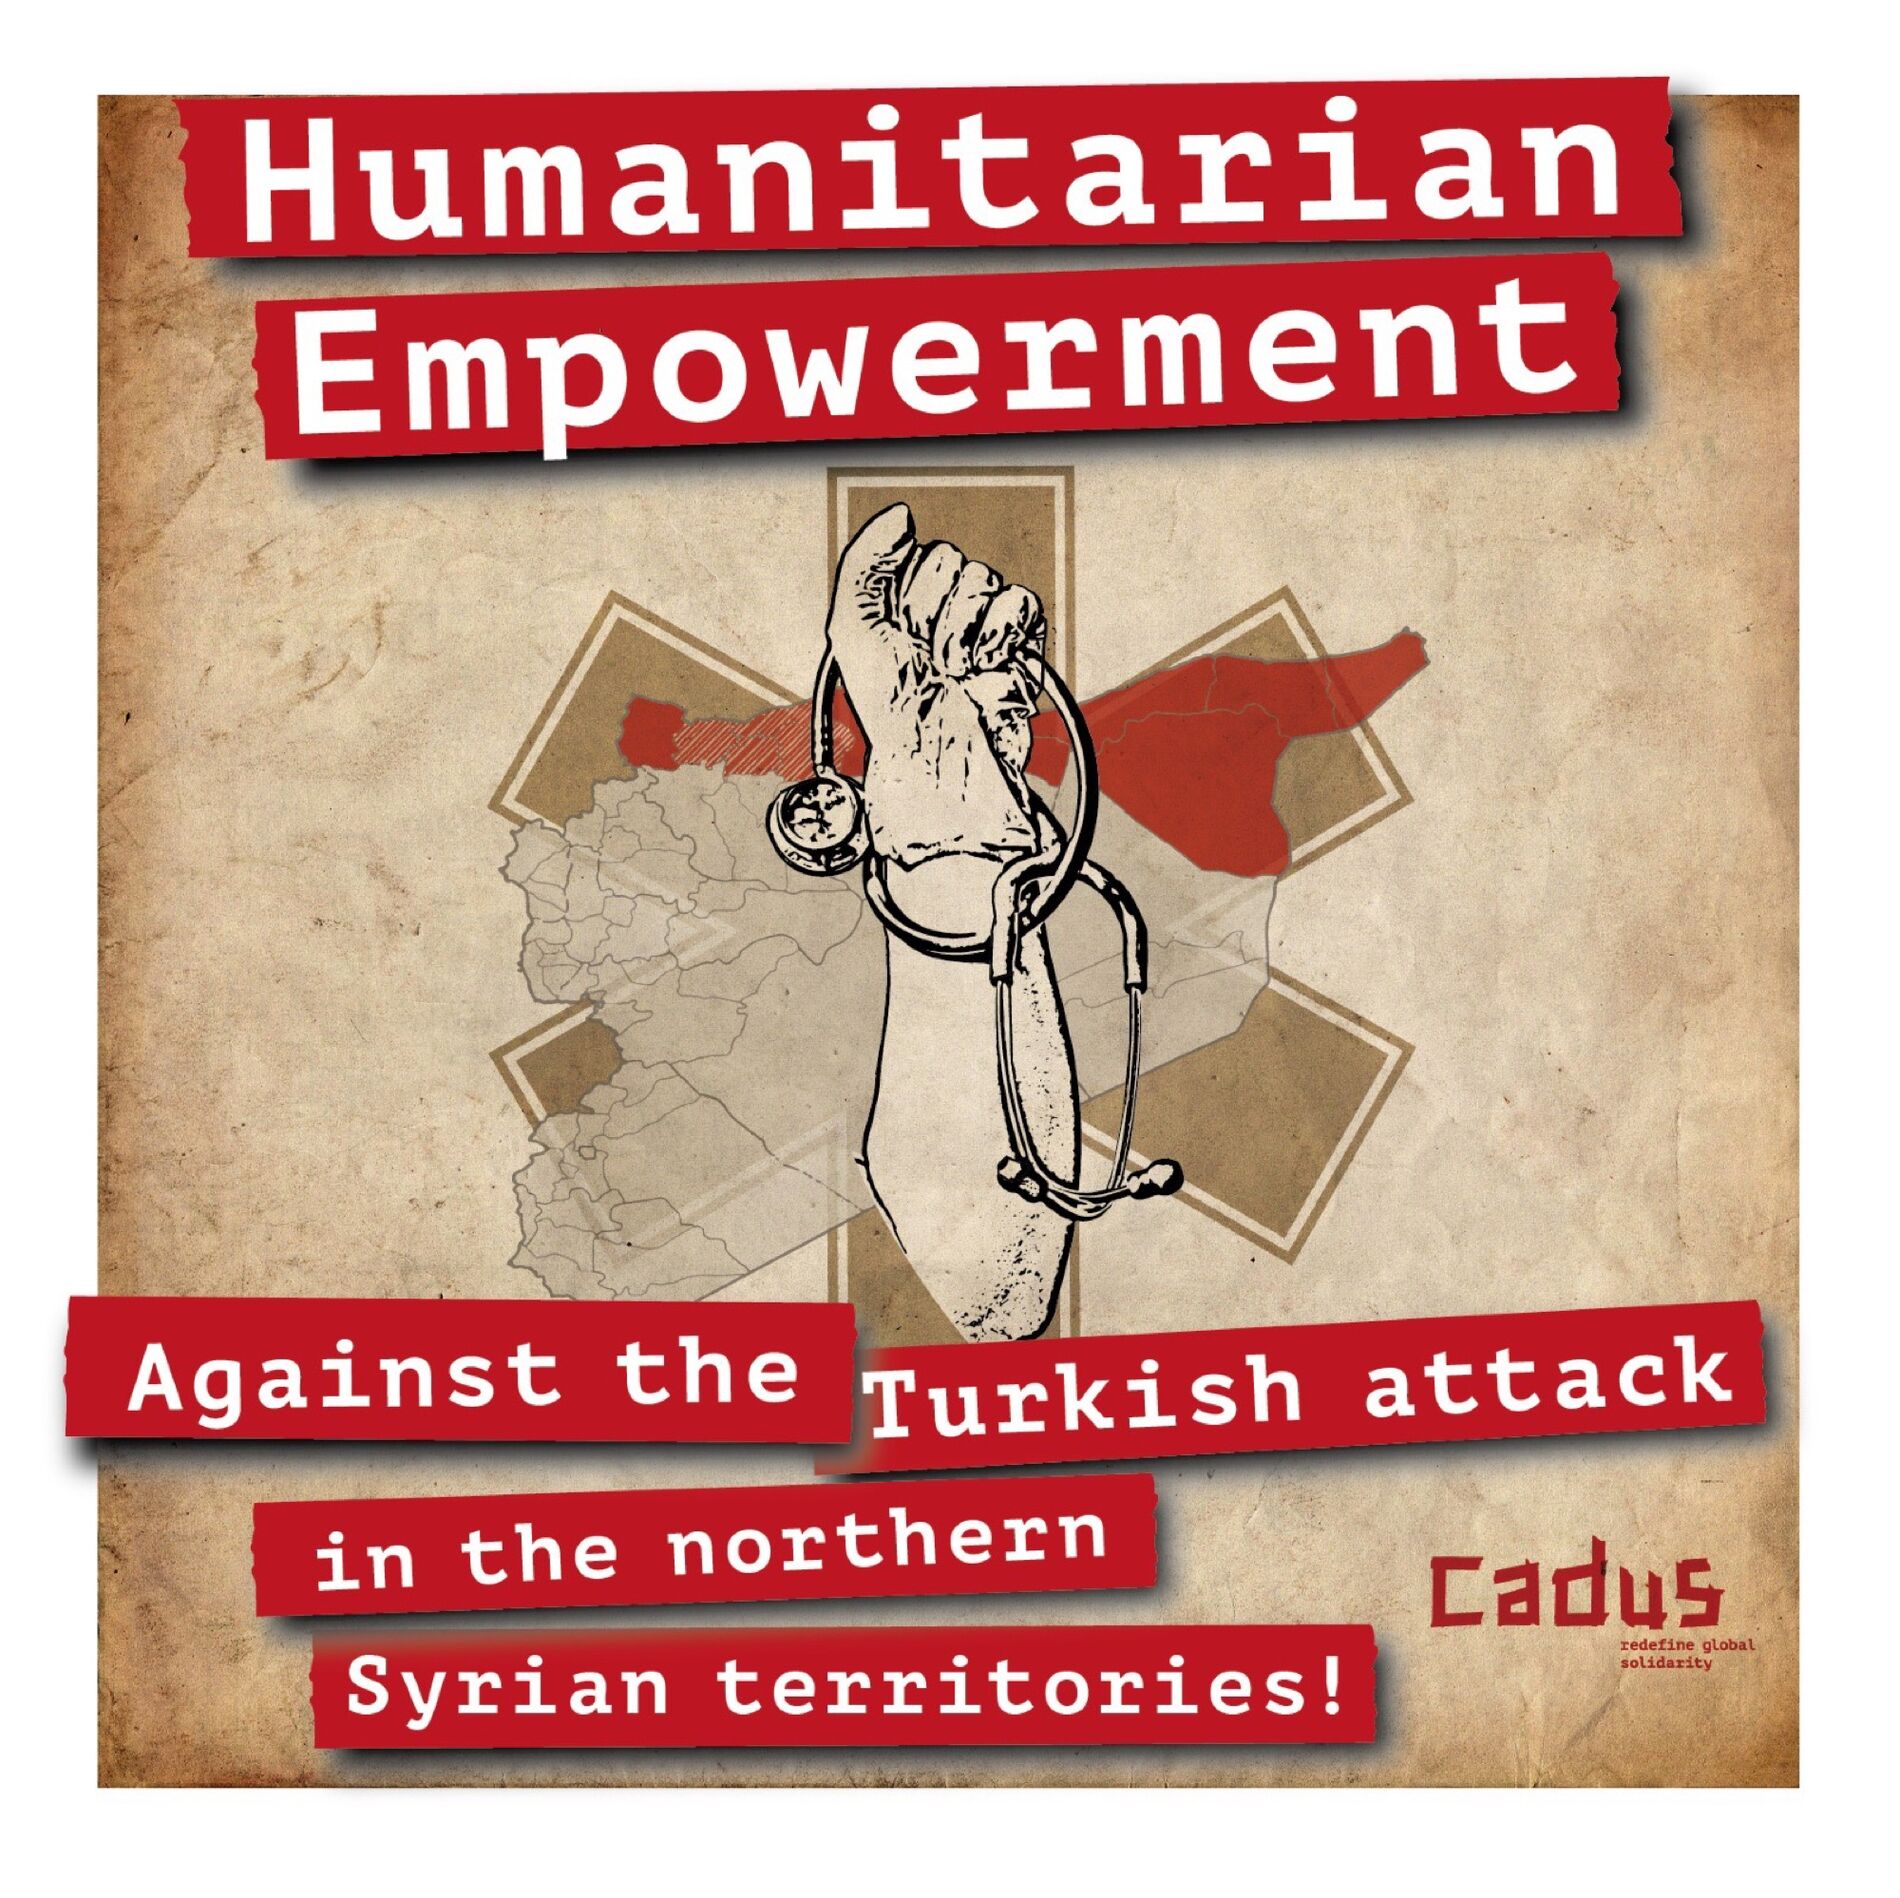 Humanitarian Empowerment - Against the Turkish attack in the northern Syrian territories!